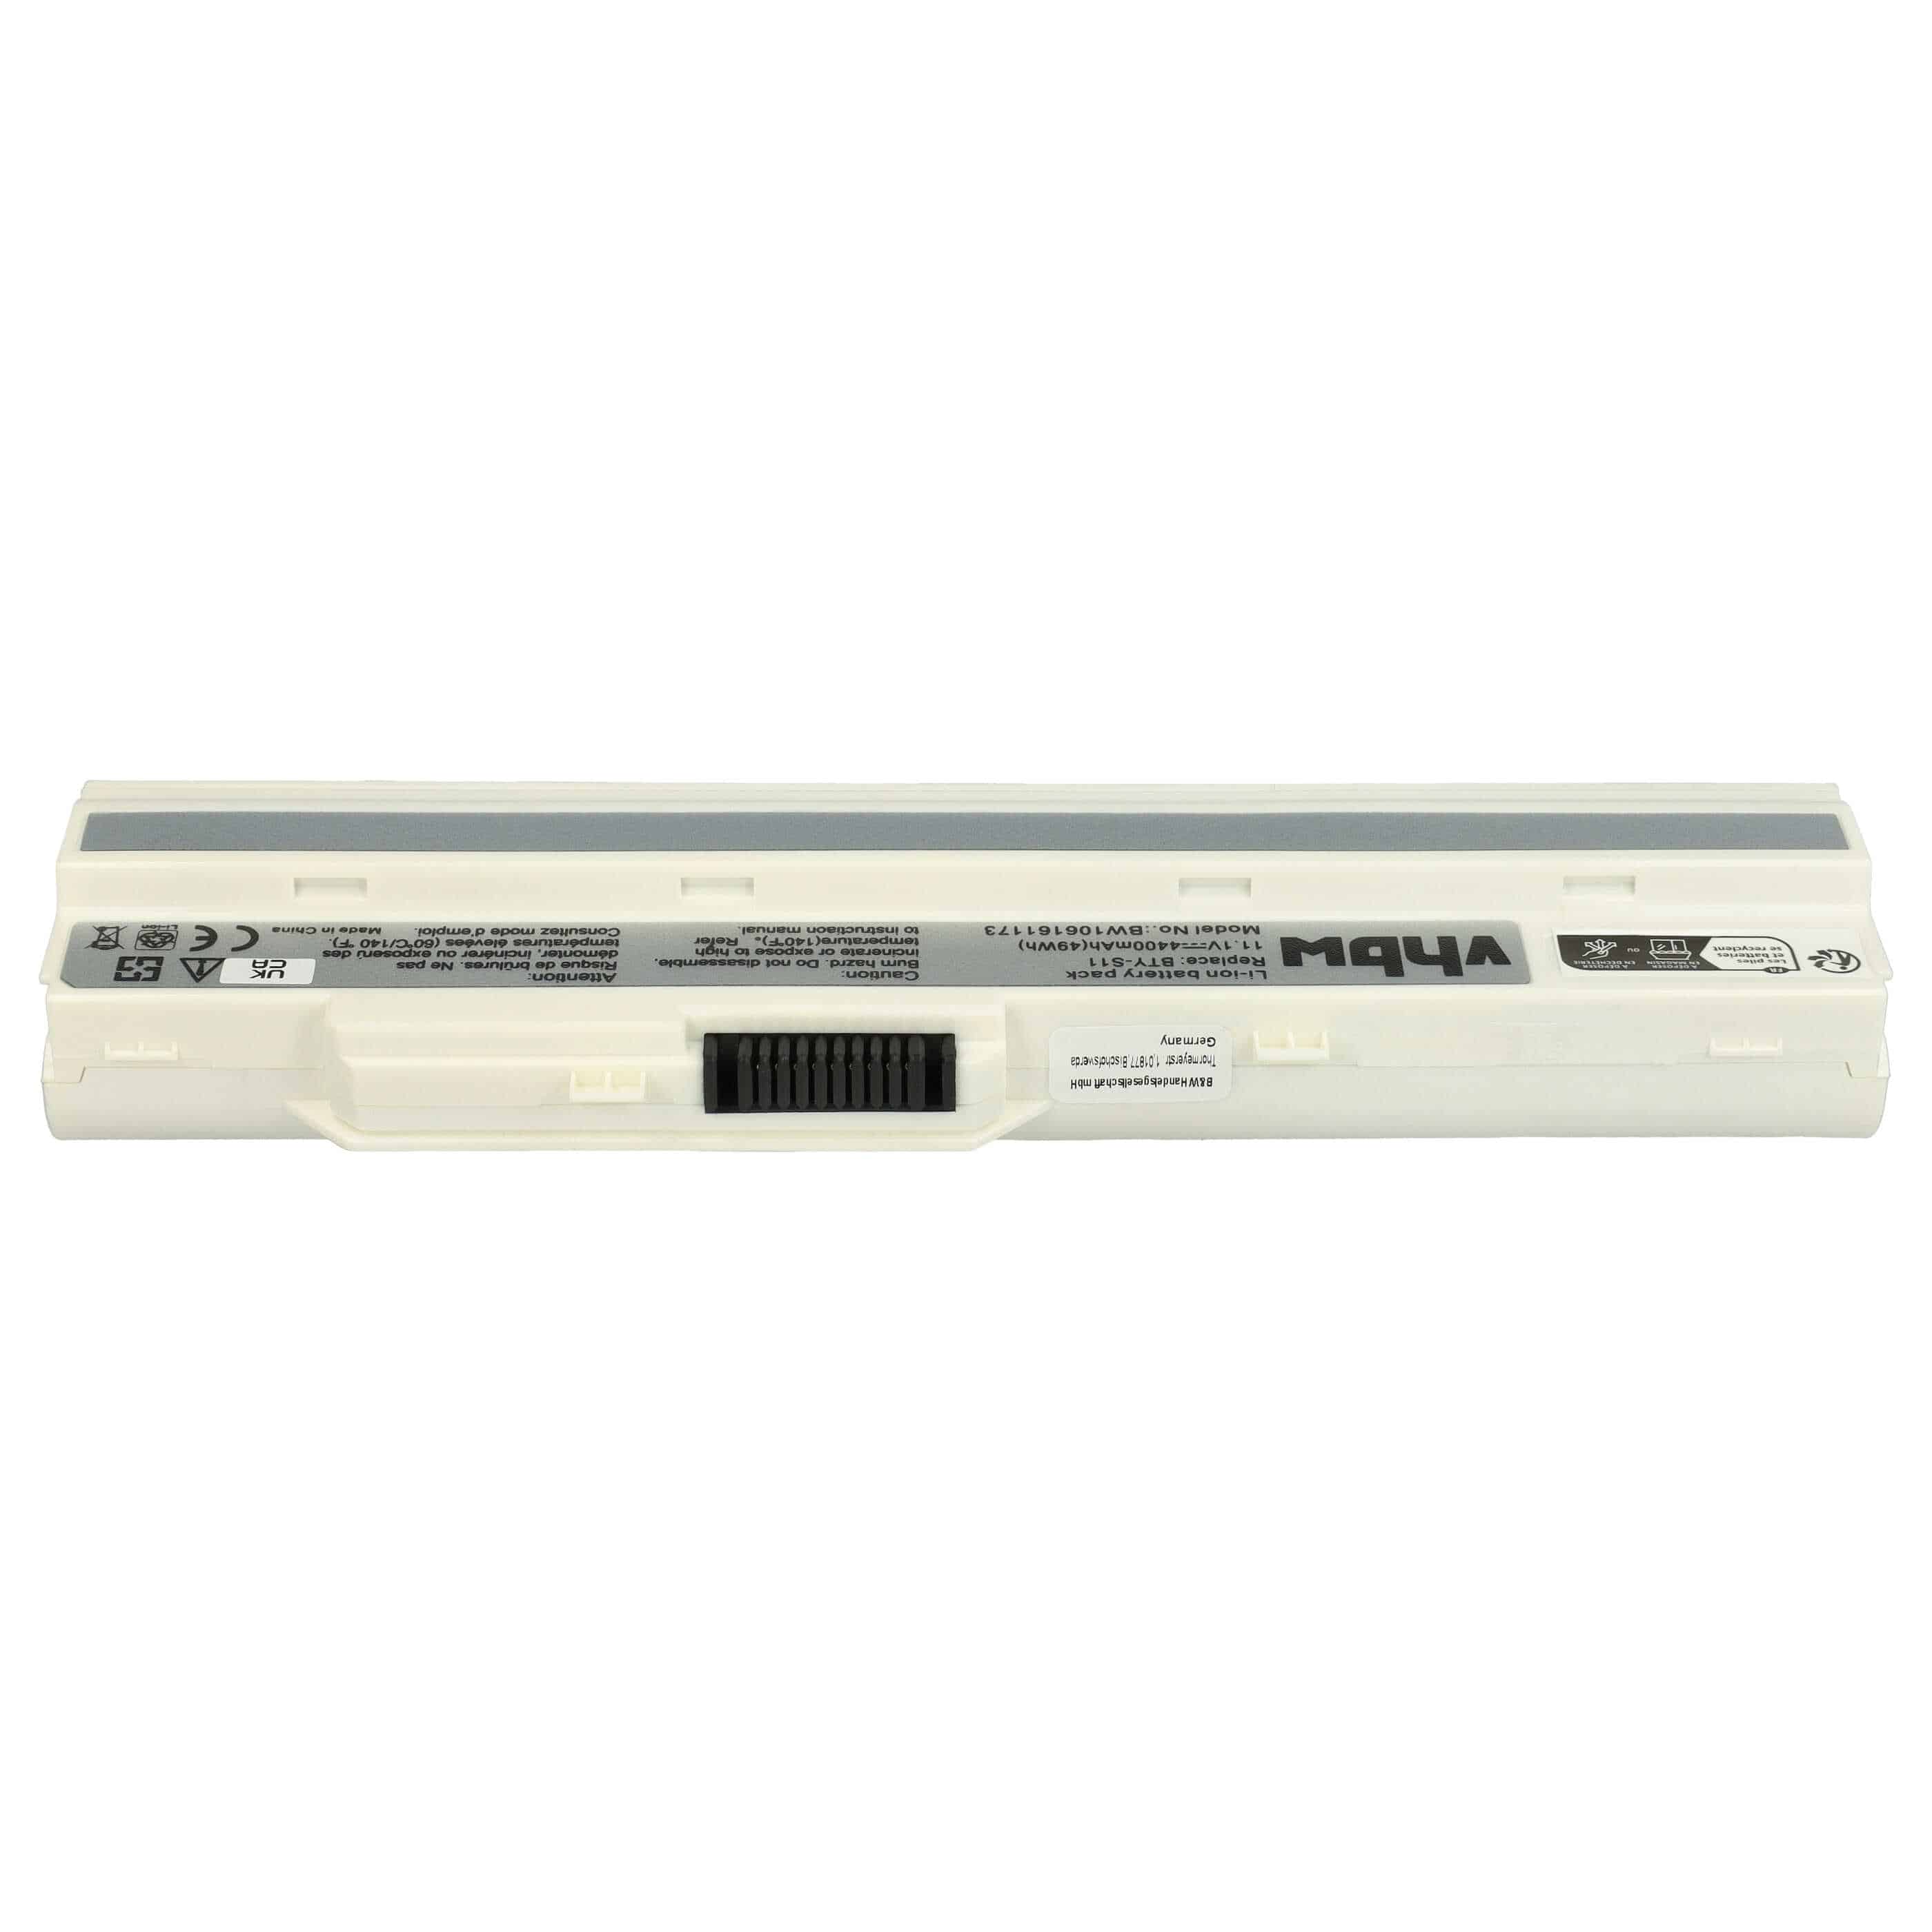 Notebook Battery Replacement for BTY-S11, BTY-S12, BTP-S11, BTP-S12, BTY-S13 - 4400mAh 11.1V Li-Ion, white